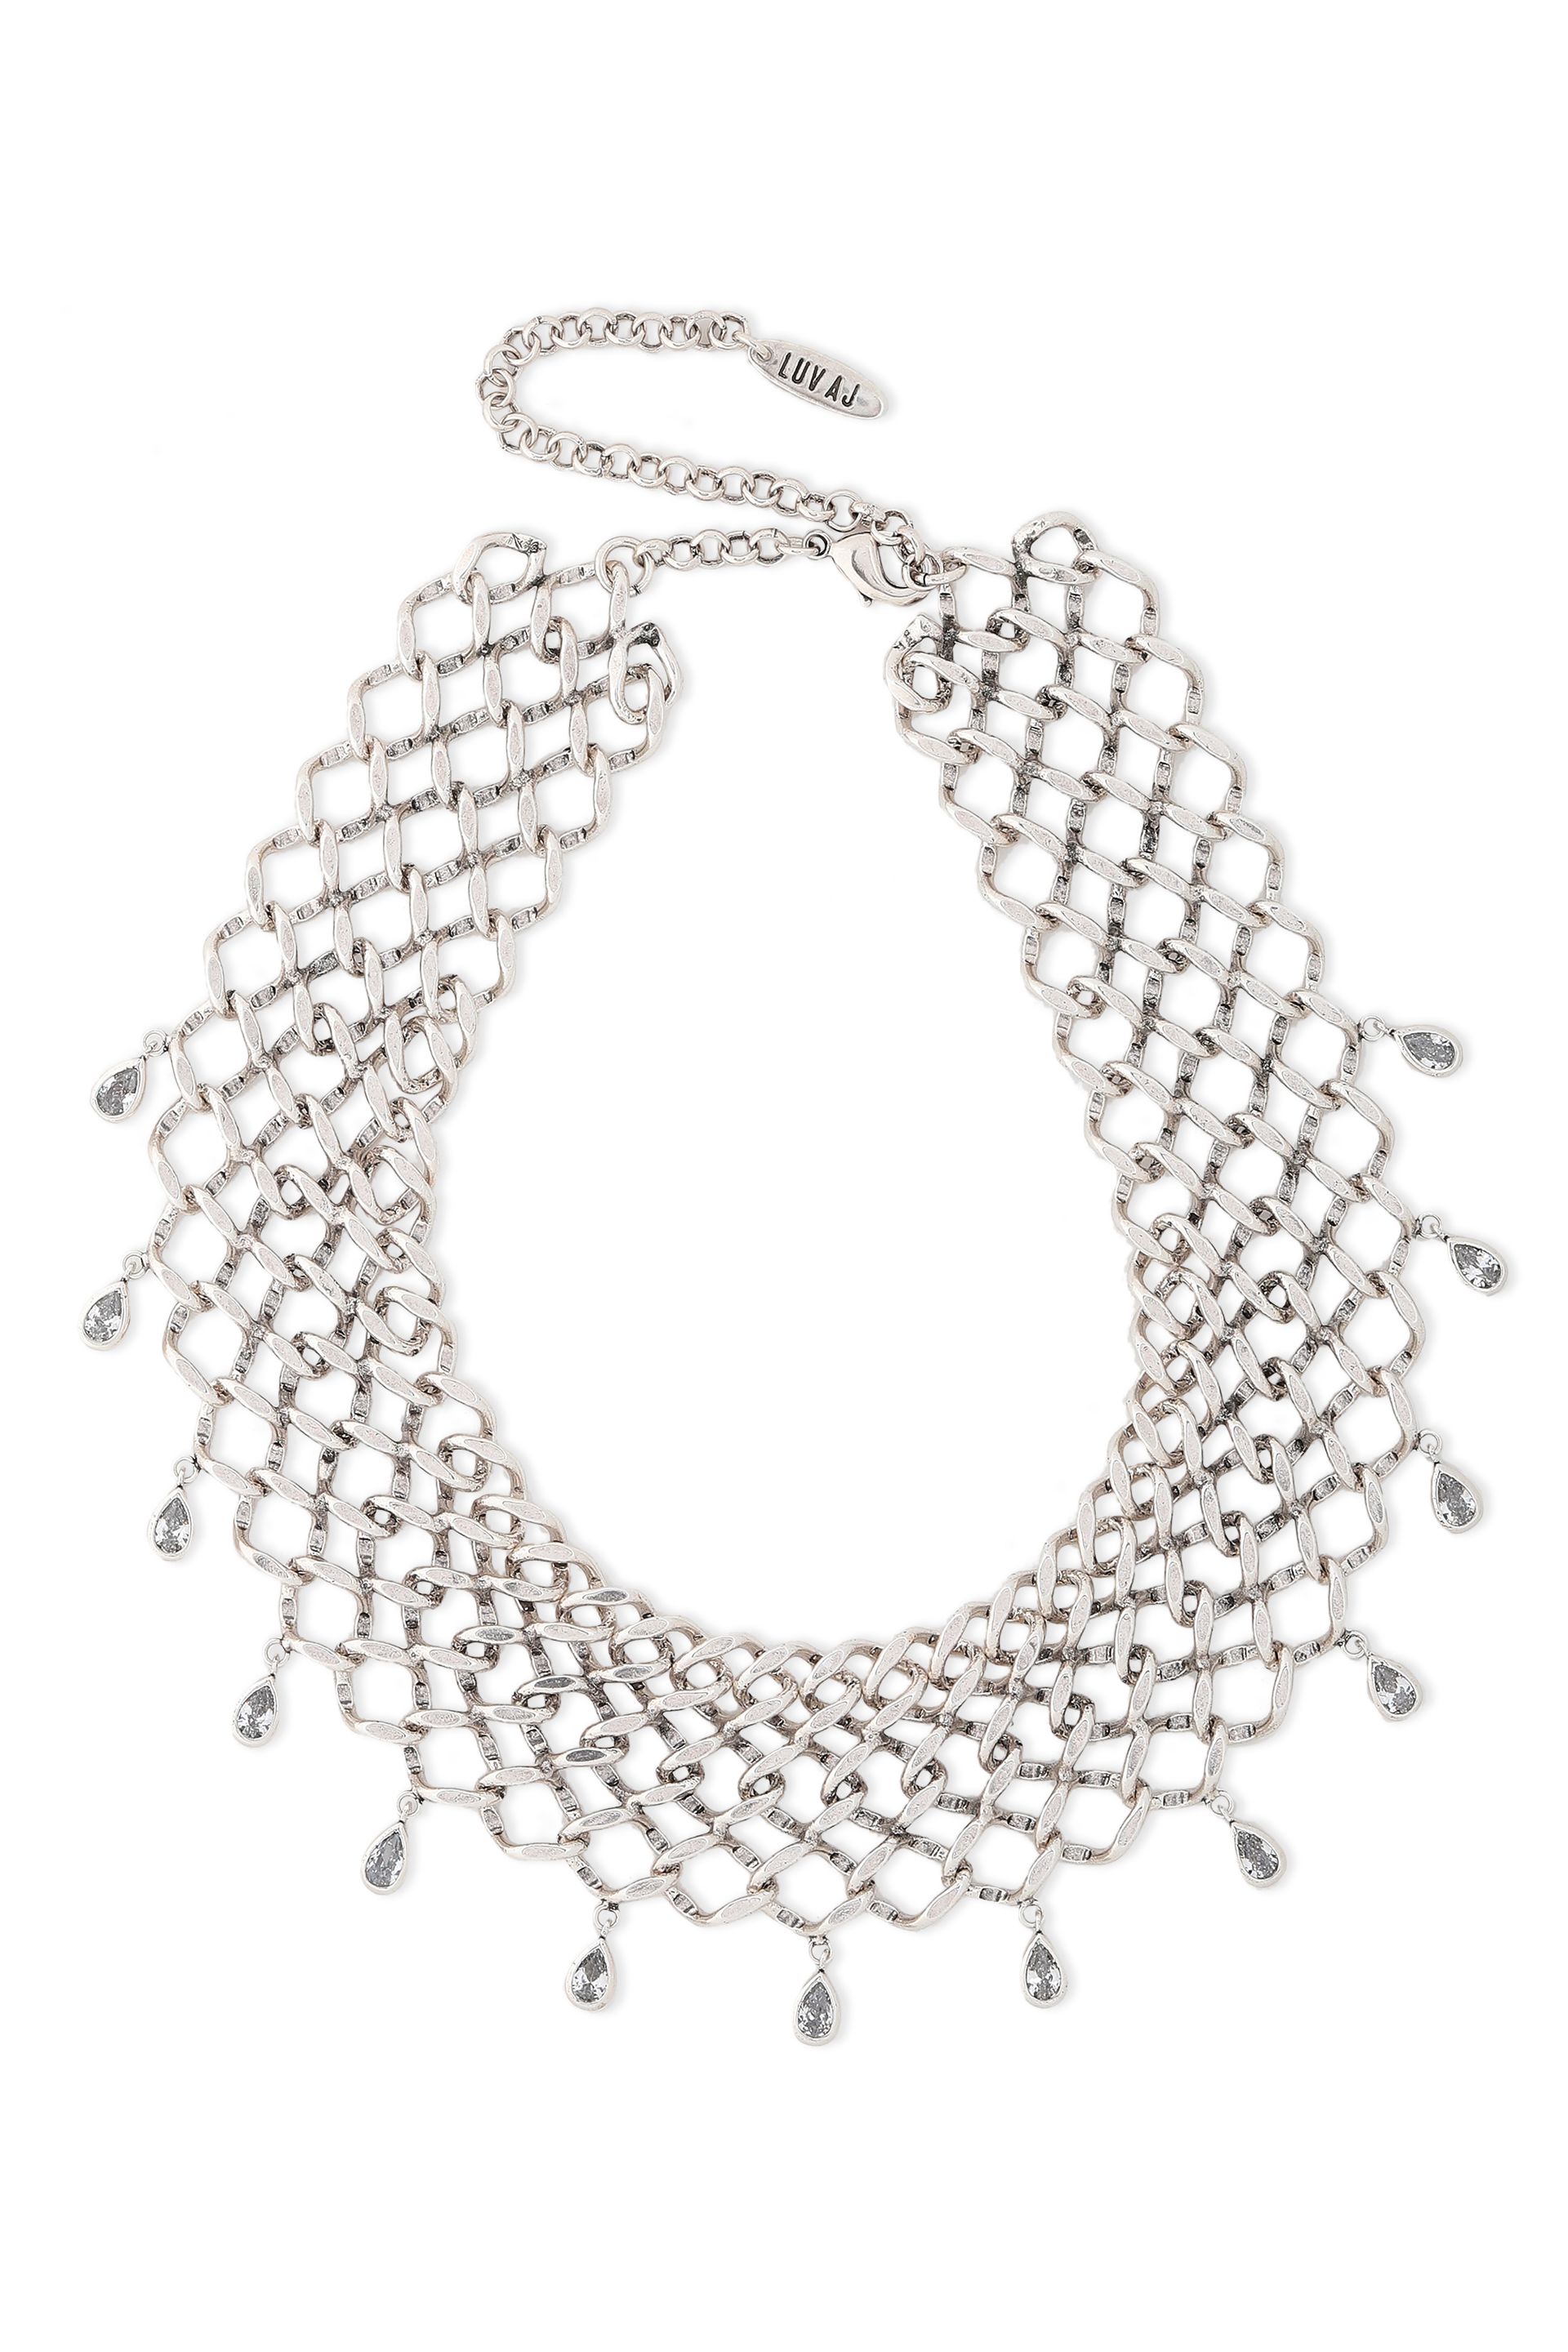 Designer Fashion Jewelry | Sale Up To 70% Off At THE OUTNET